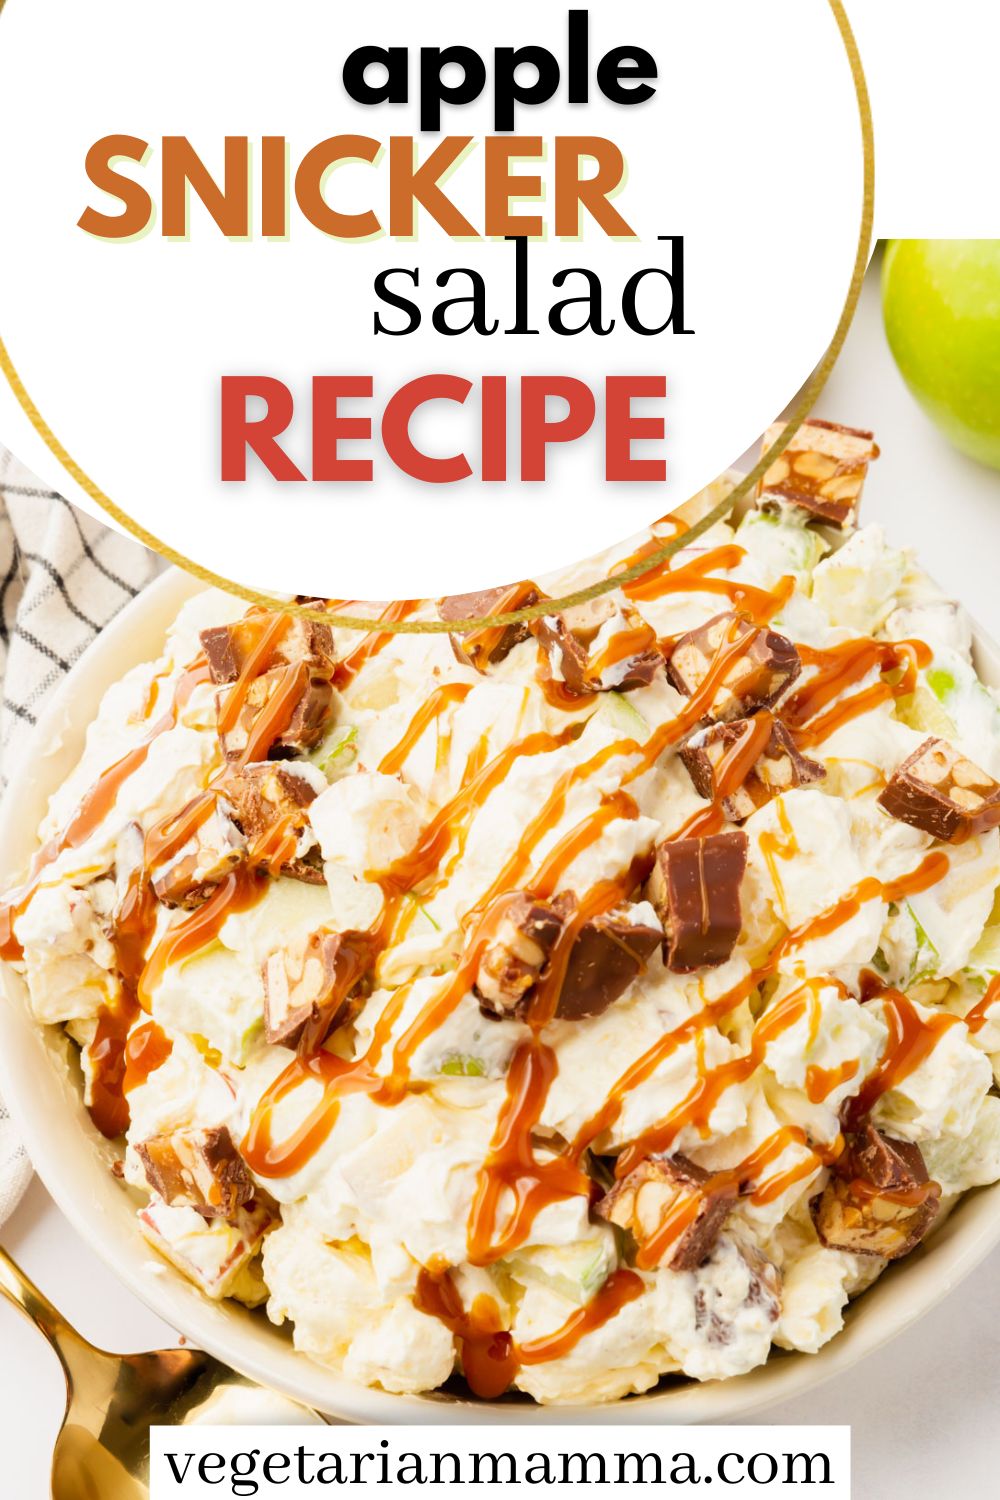 This Apple Snicker Salad is a beautifully layered dessert that is perfect for cookouts and backyard BBQs! Yes, it's just like Grandma used to make!